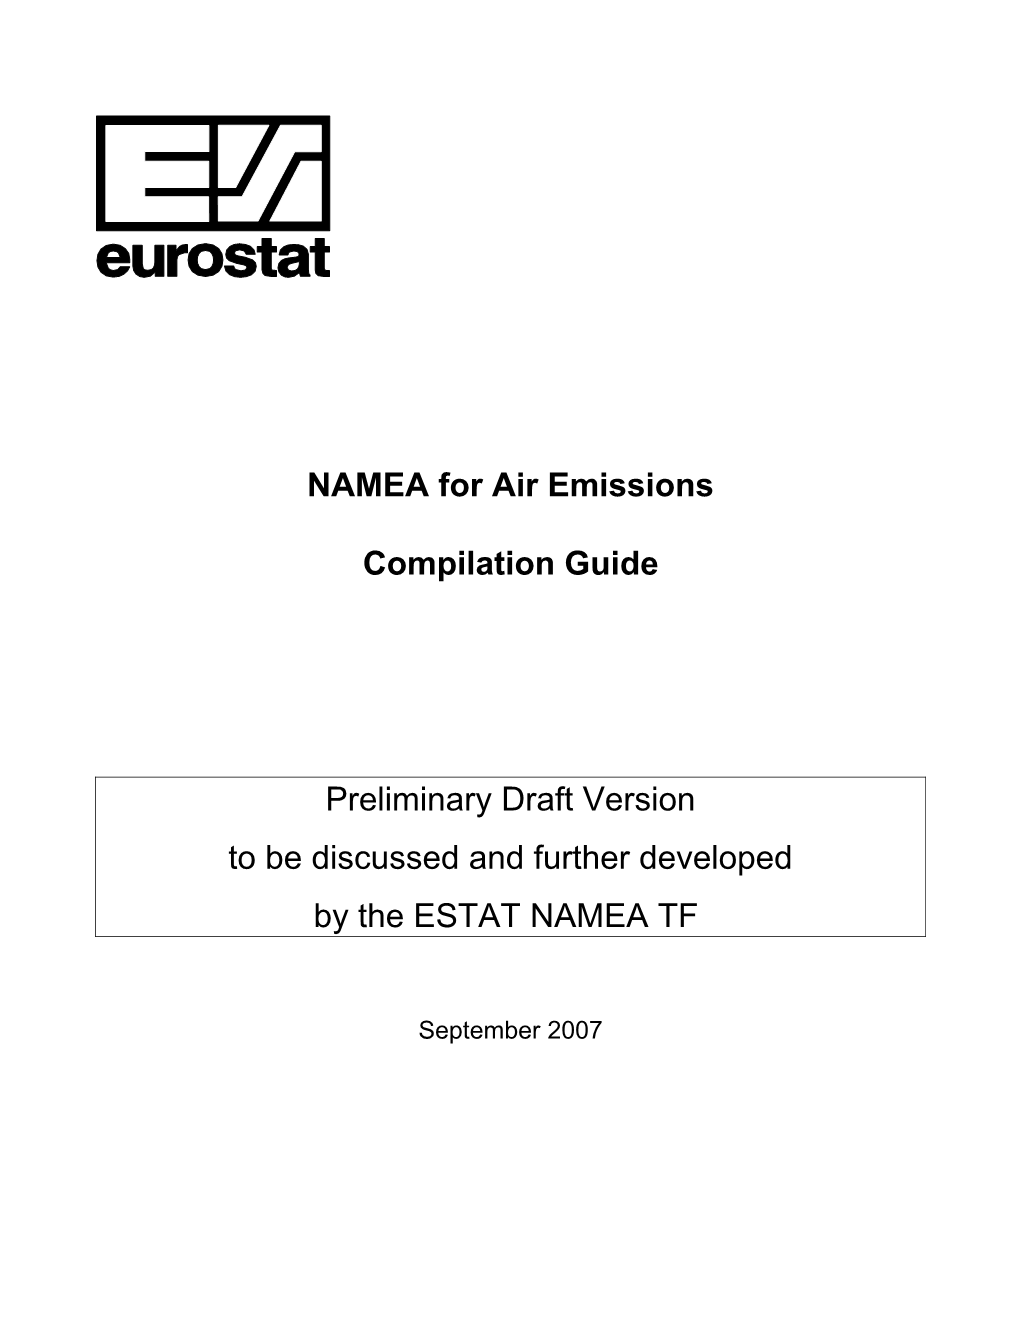 NAMEA for Air Emissions Compilation Guide